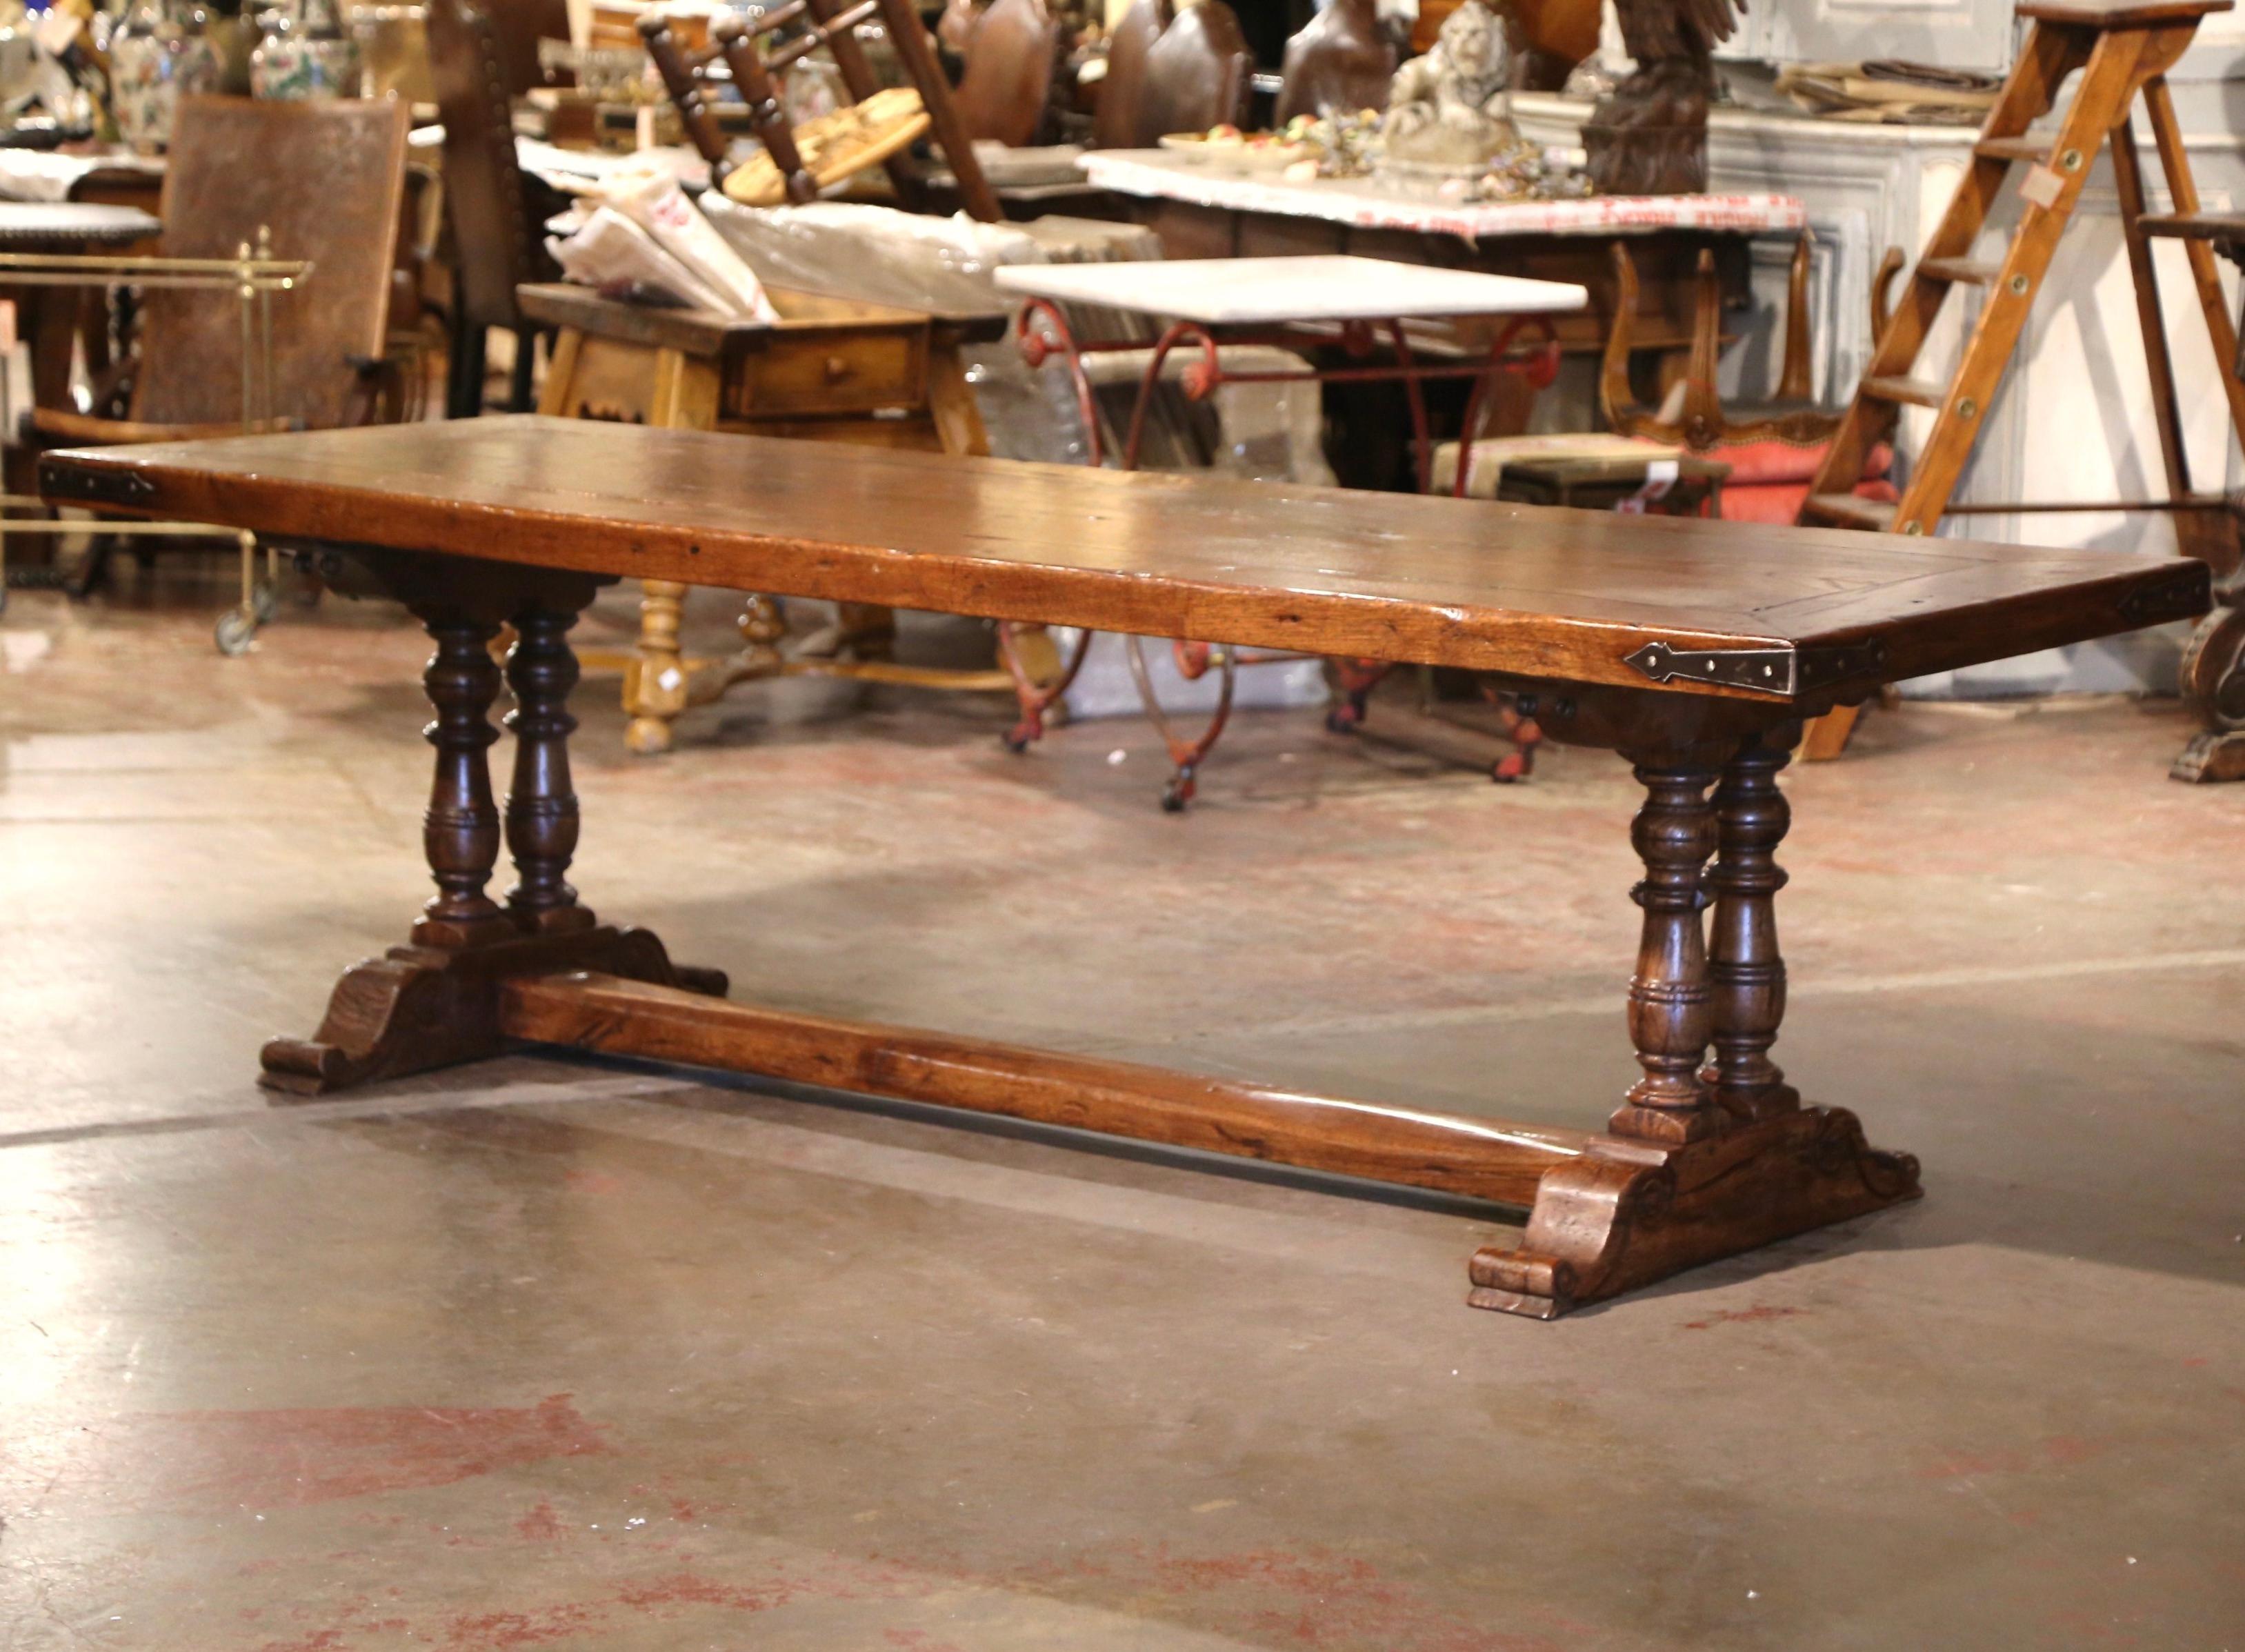 This long antique dining room table was crafted in the French Pyrenees, southwest France, near the Spanish border. Built with 18th century chestnut and oak timber and over 8 feet in length, the table stands on two hand carved double-baluster legs